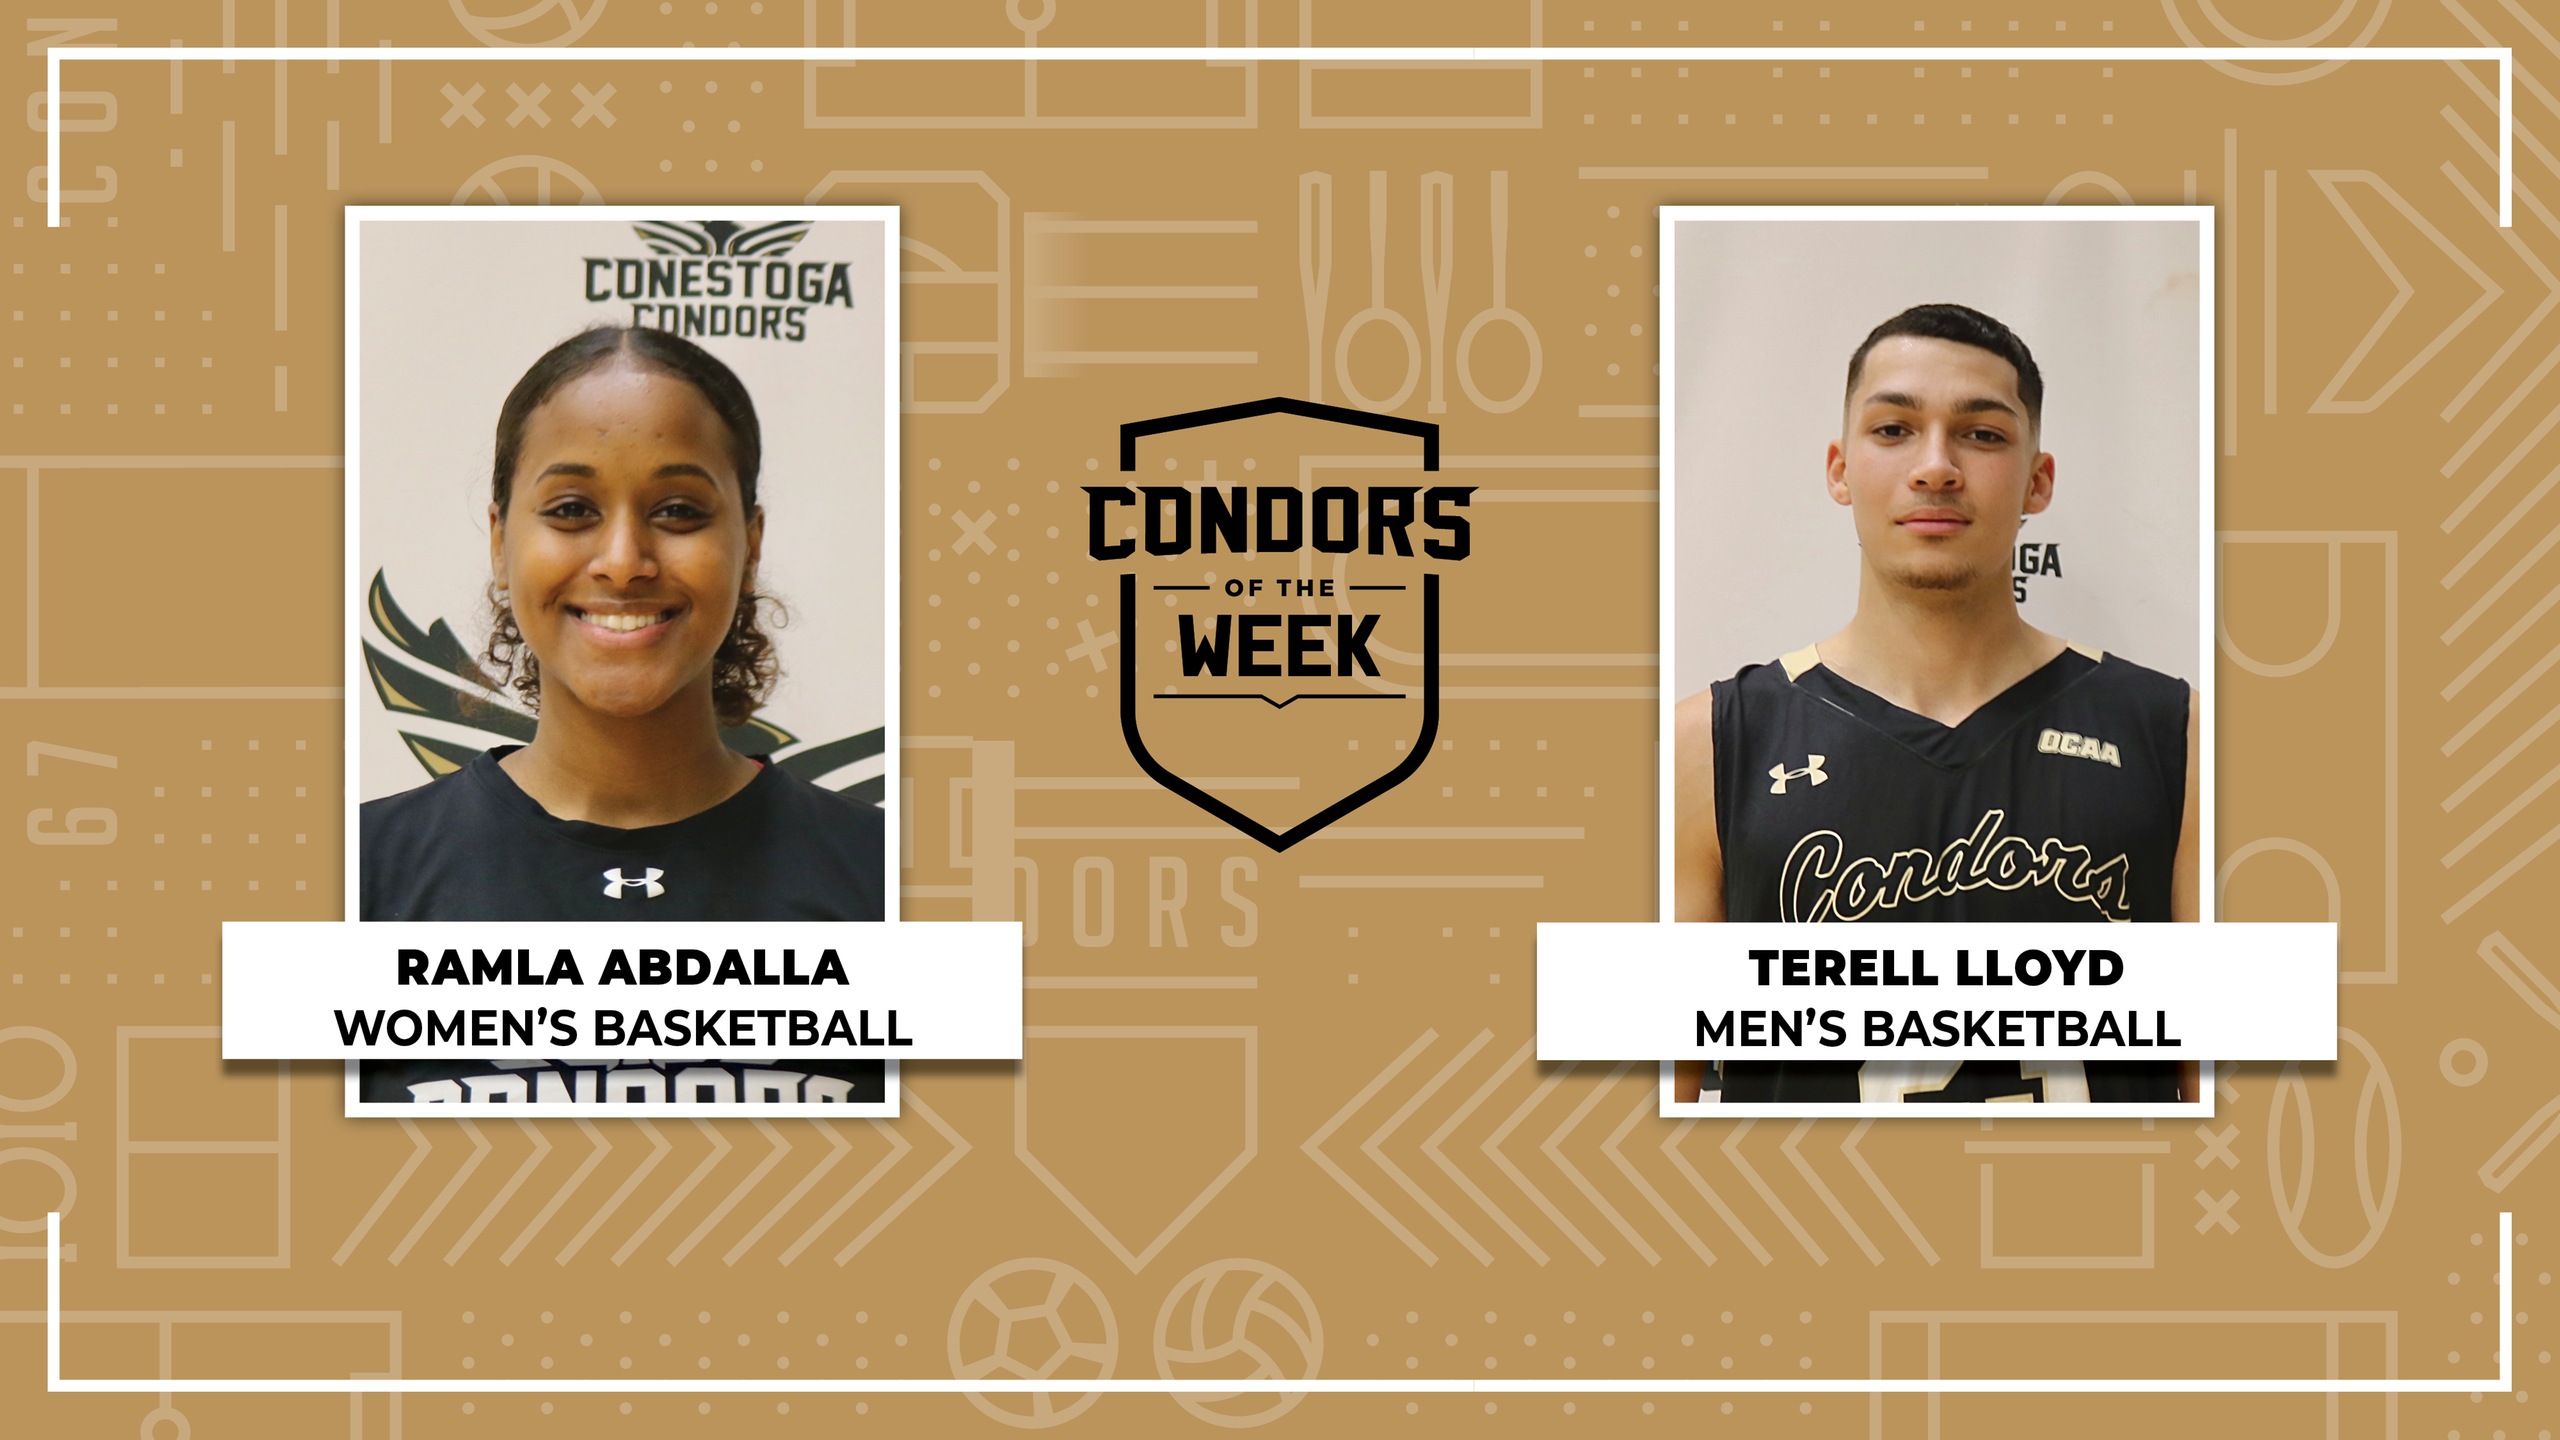 Condors Of The Week